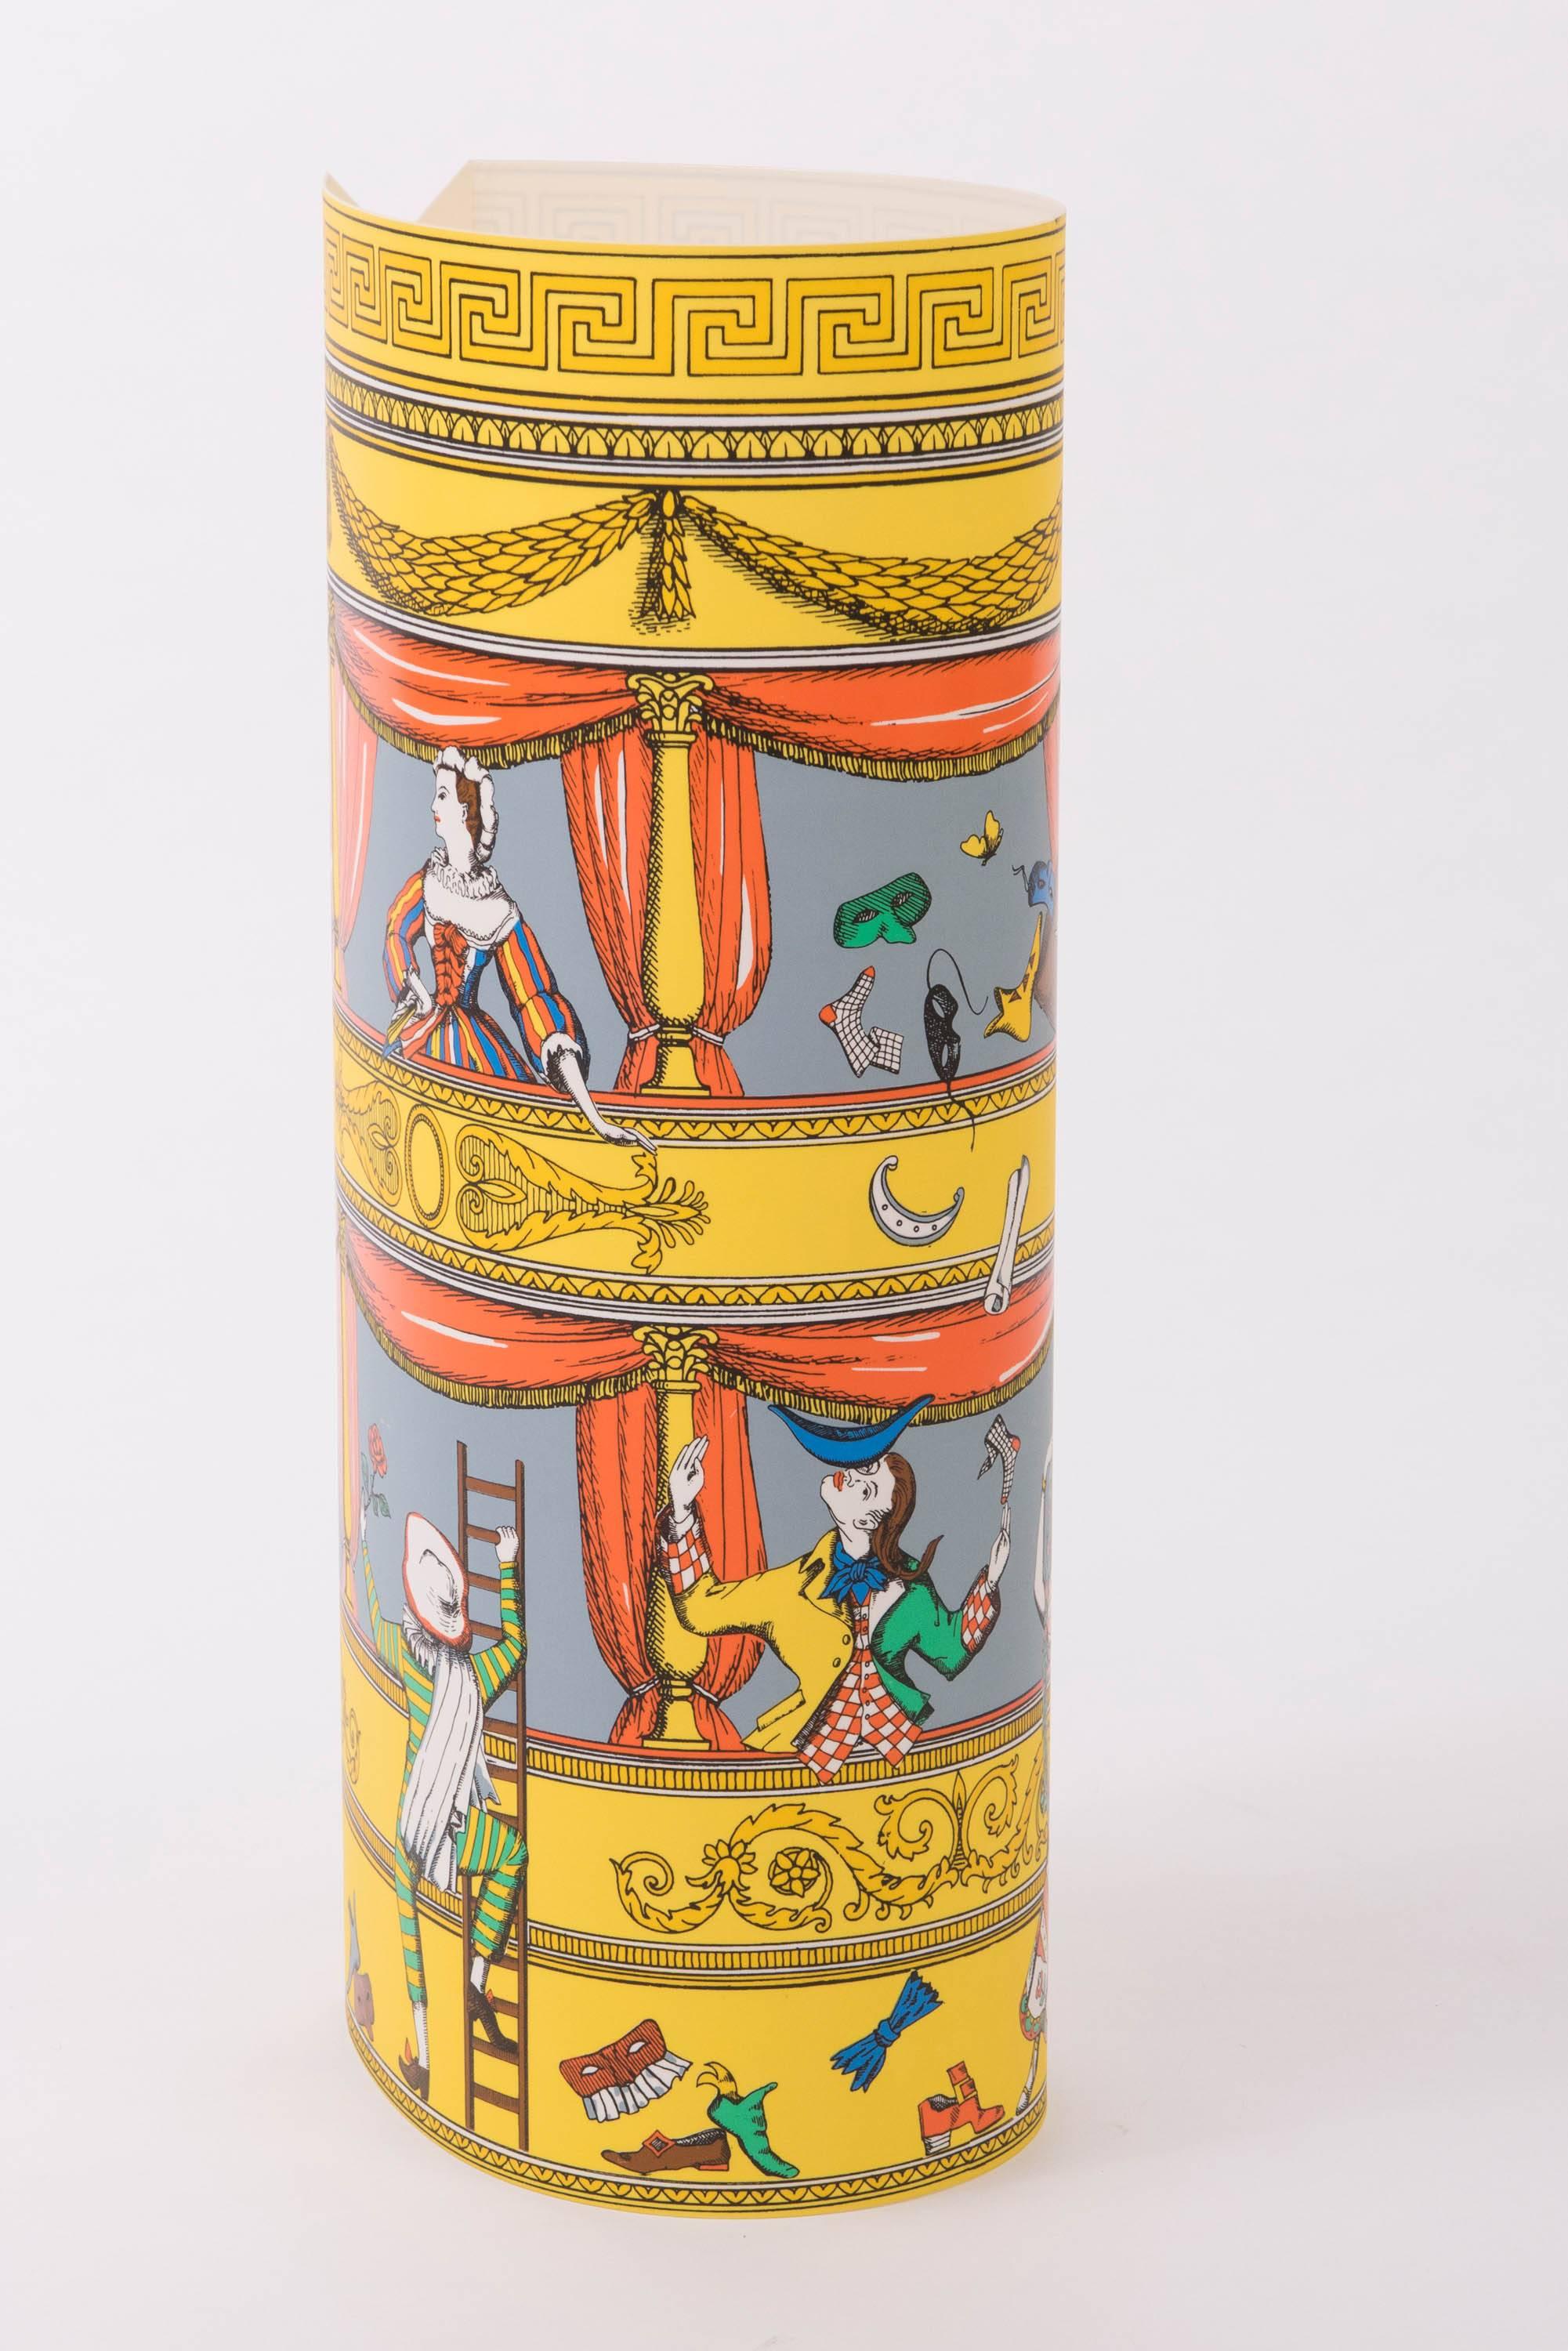 A pair of table lamps by Barnaba Fornasetti
“Commedia Italiano Media”
Printed and colored Perspex
Made by Fornasetti and Antonangeli Iluminazione. Paderno Dugano.
Italy, 1995
Measure: 60 cm high x 25 cm deep x 20 cm wide.

 